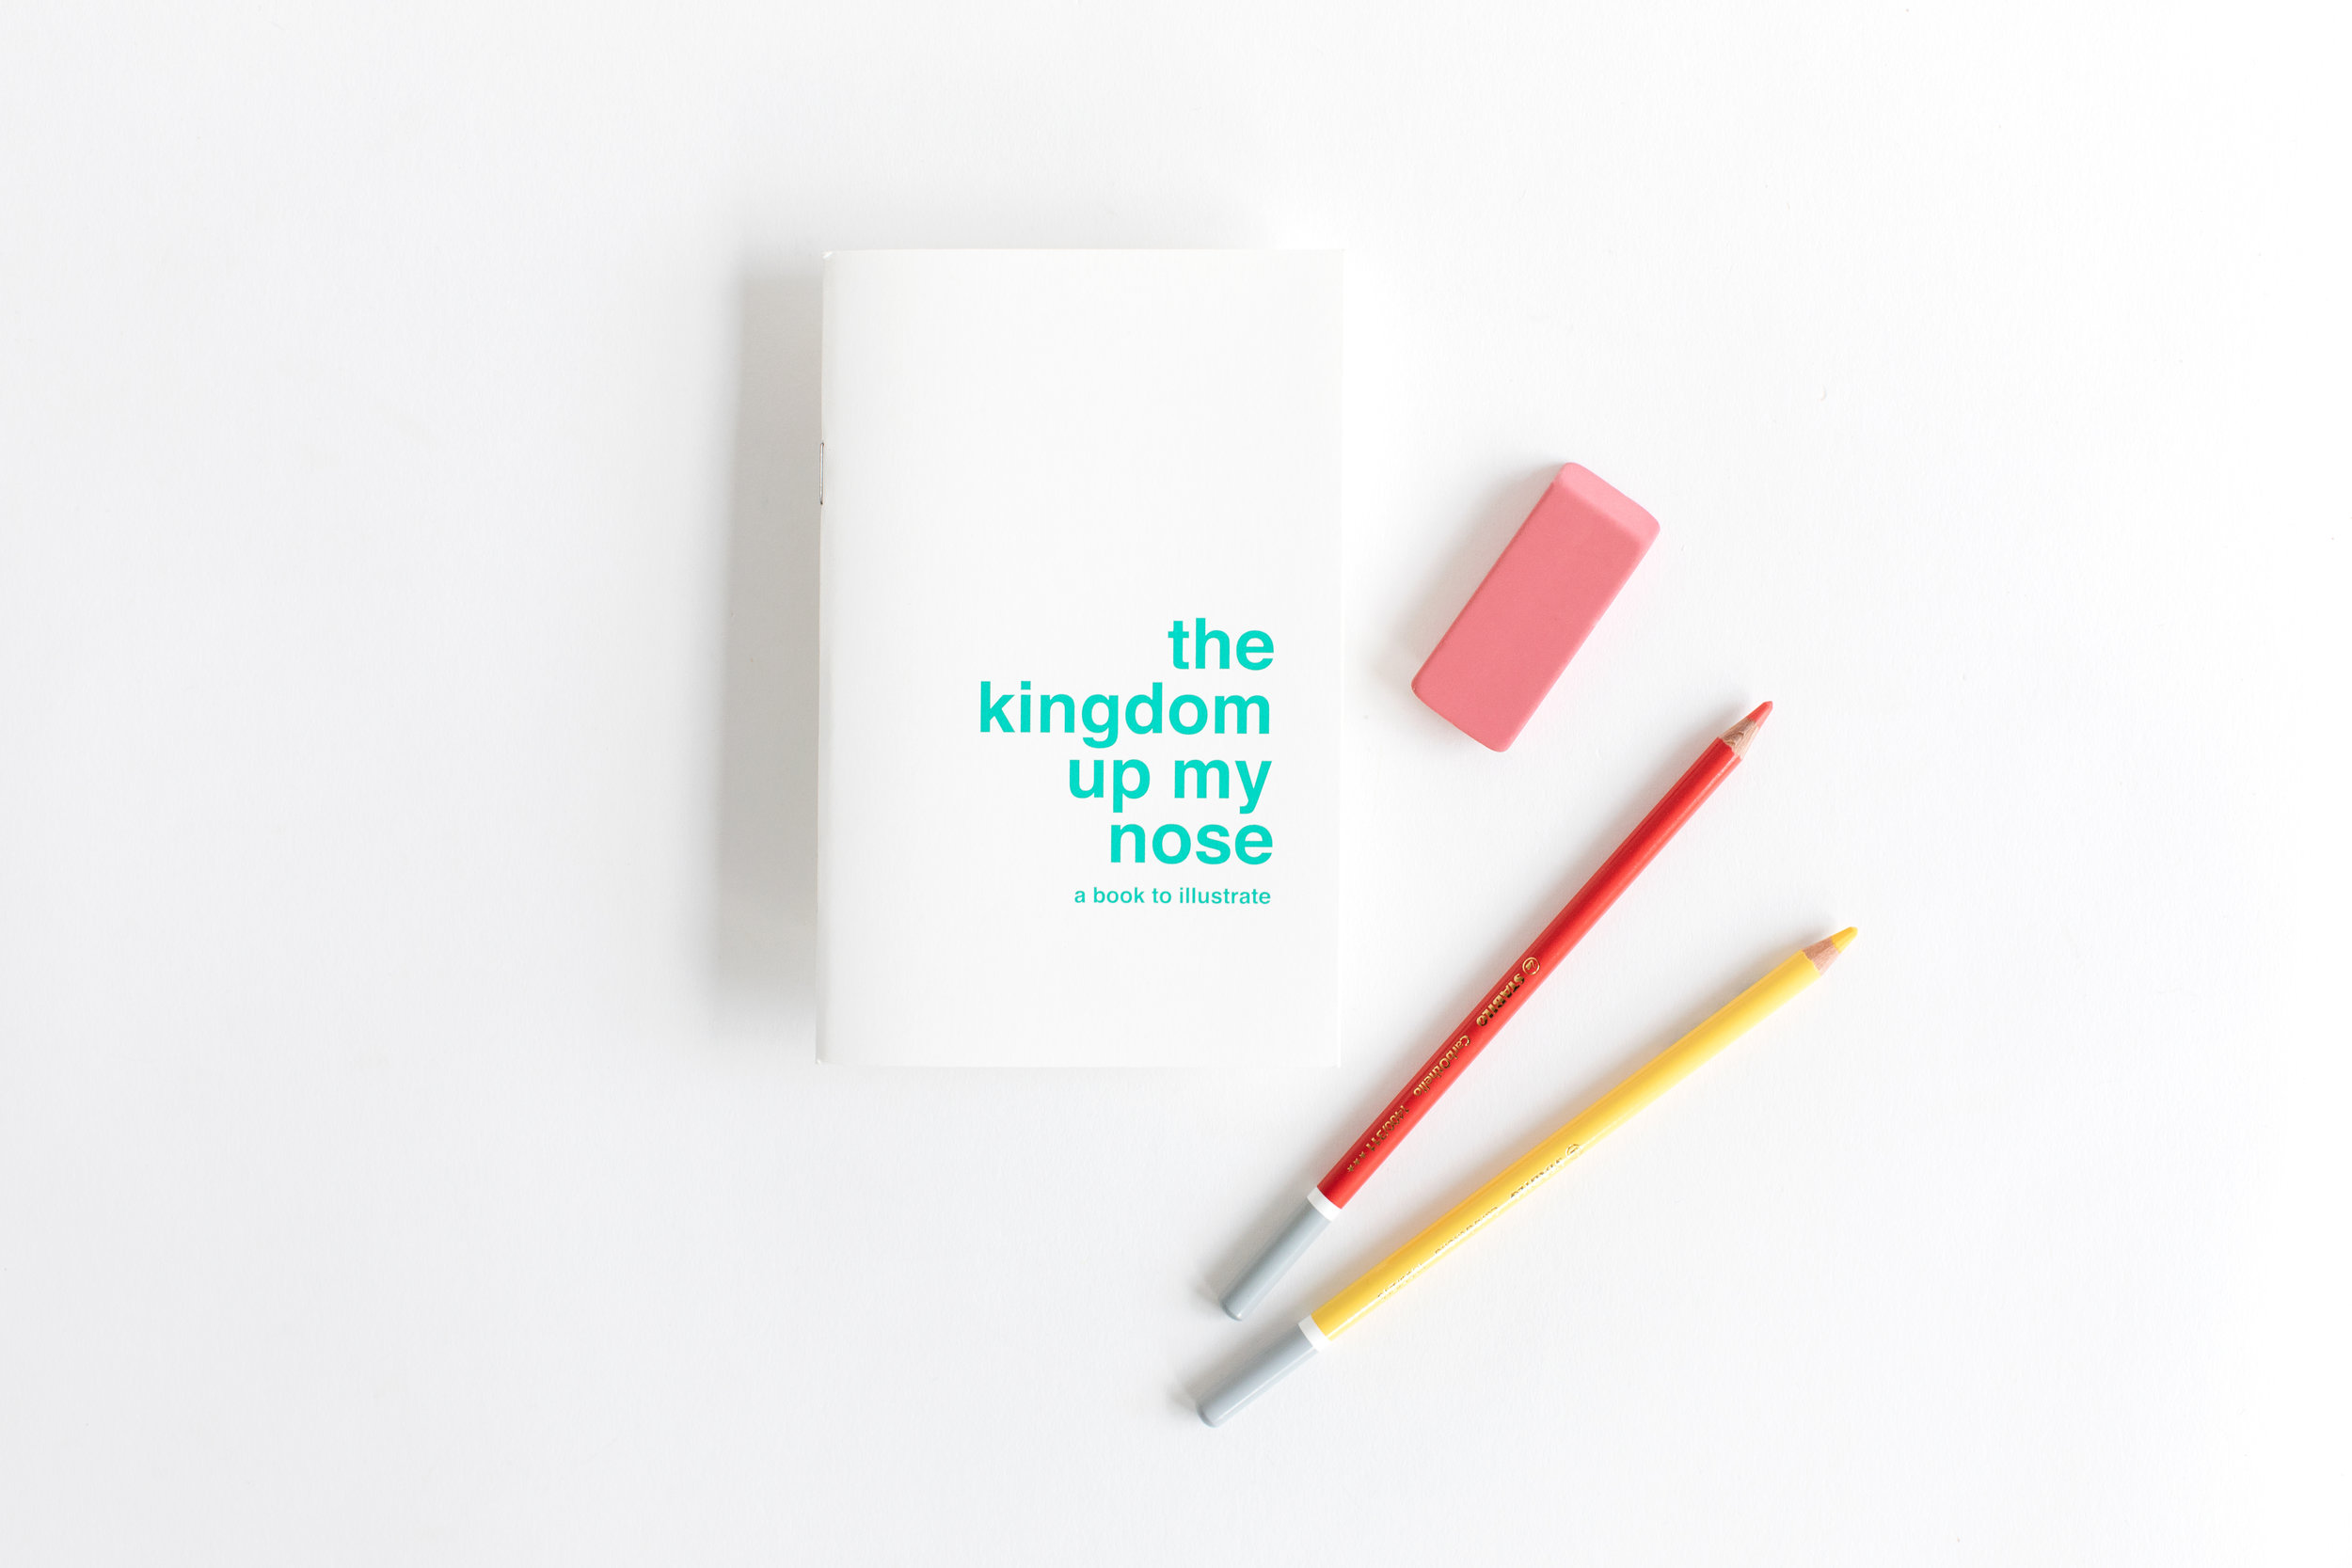  Supereditions 'The Kingdom Up My Nose' illustrating book,  $15   